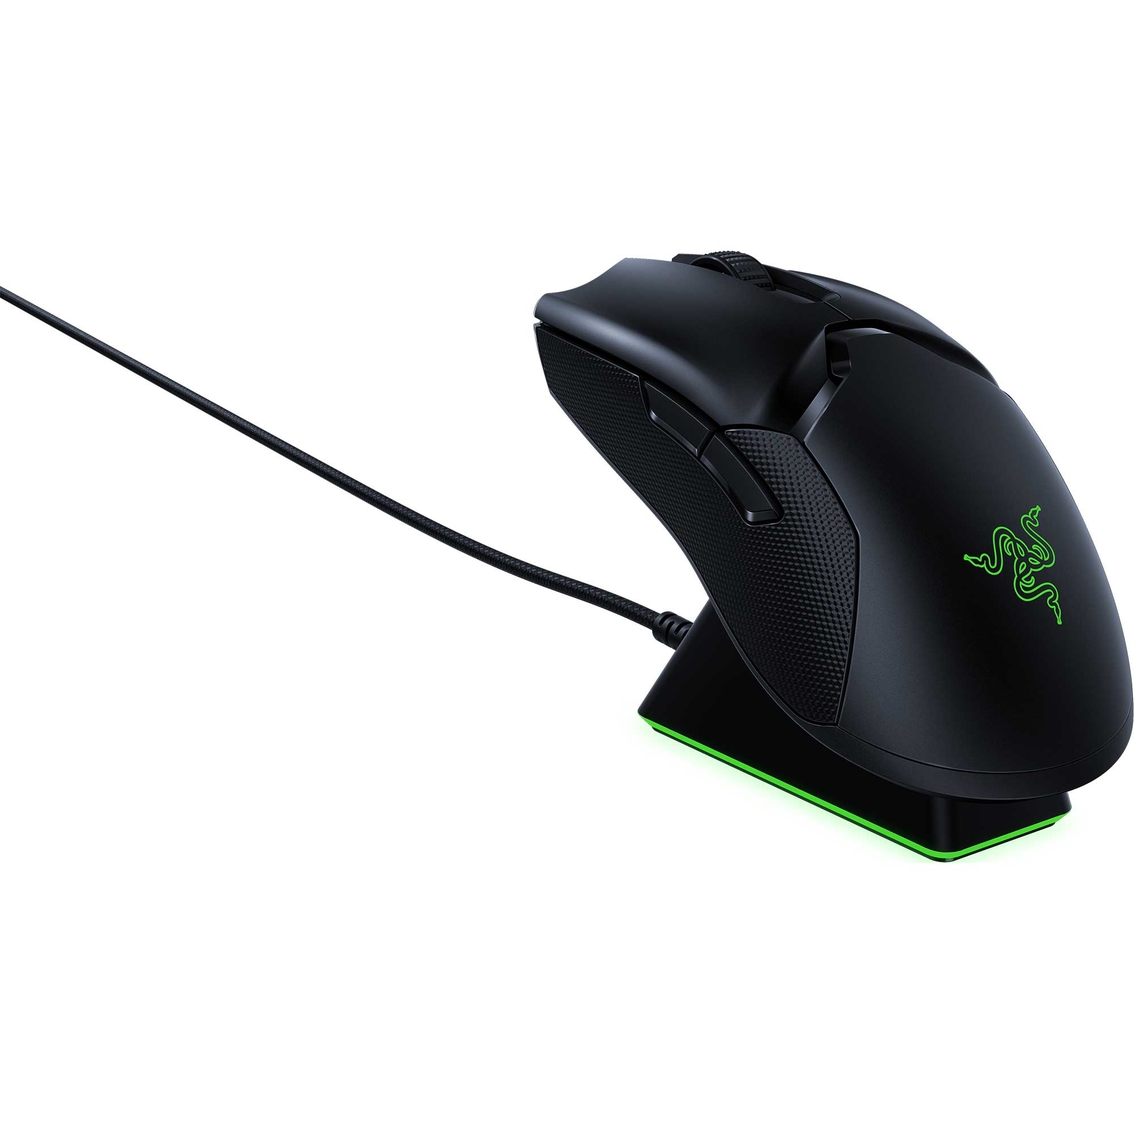 Razer Viper Ultimate Wireless Gaming Mouse With Charging Dock Pc Gaming Accessories Electronics Shop The Exchange